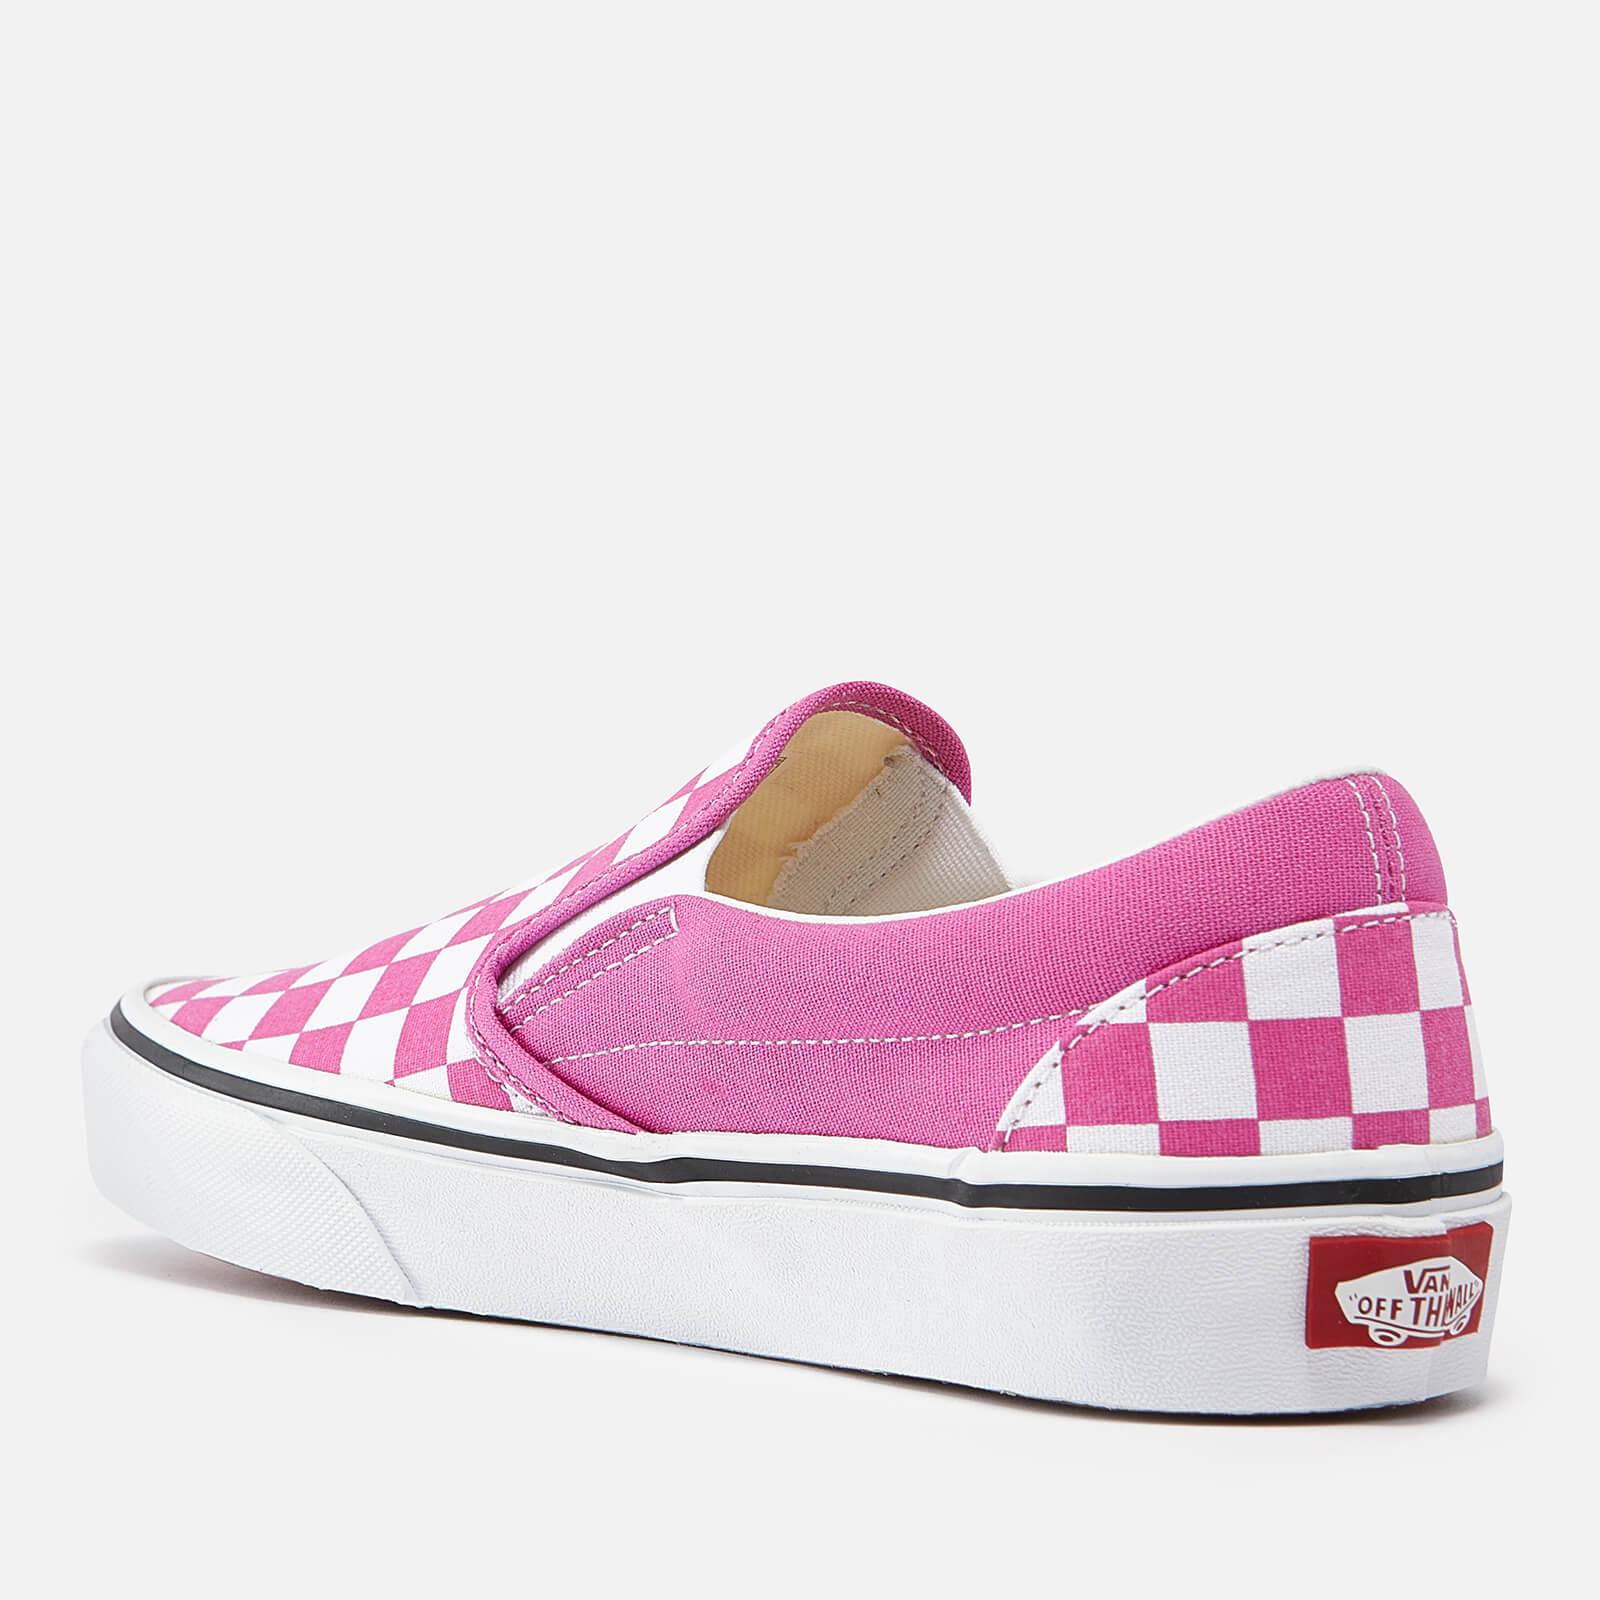 Bonde ret hjemme Vans Checkerboard Classic Slip-on Trainers in Pink | Lyst